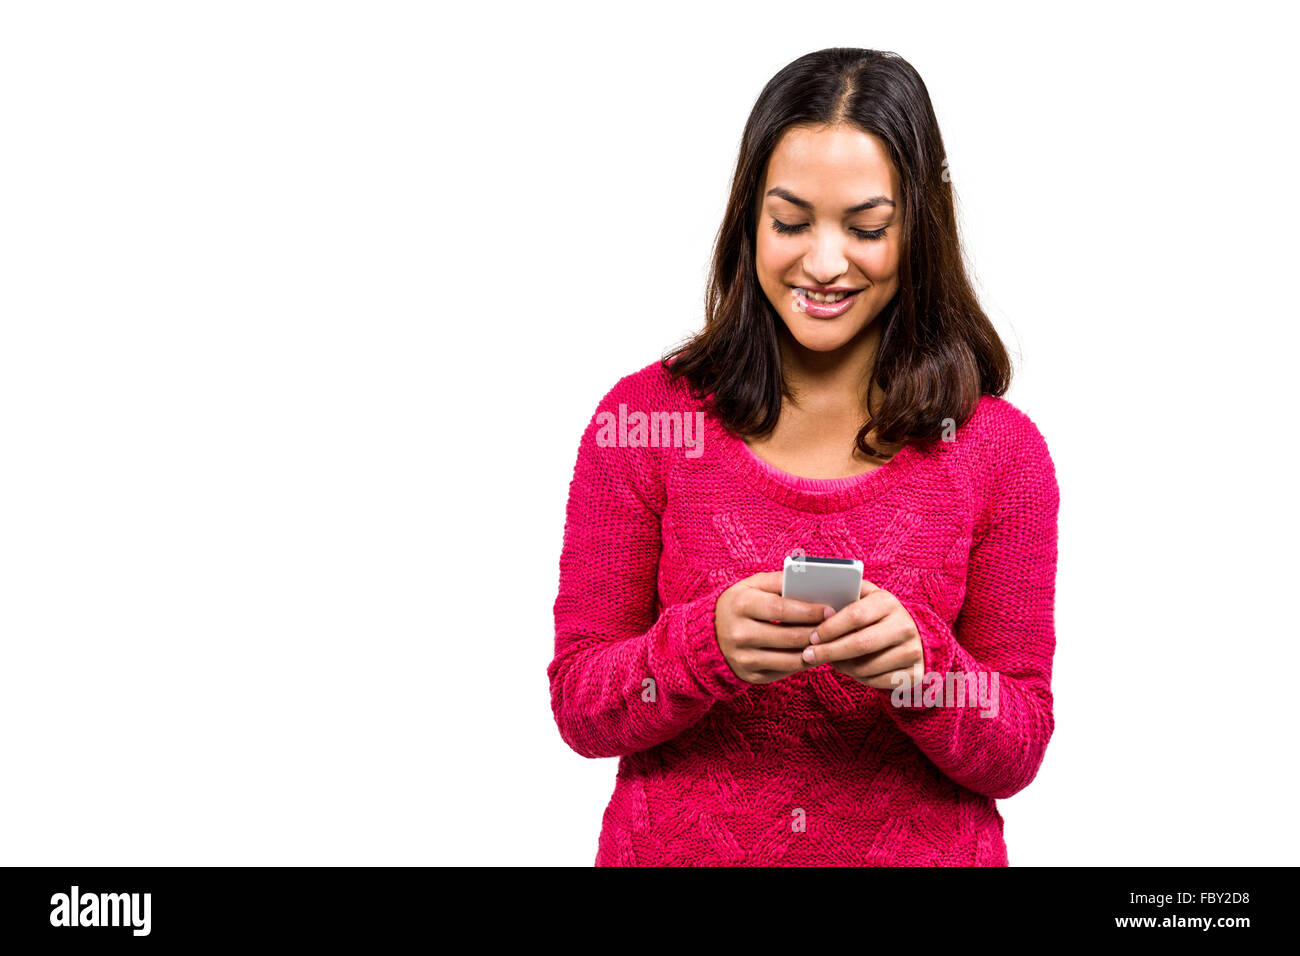 Pretty young woman using mobile phone Stock Photo